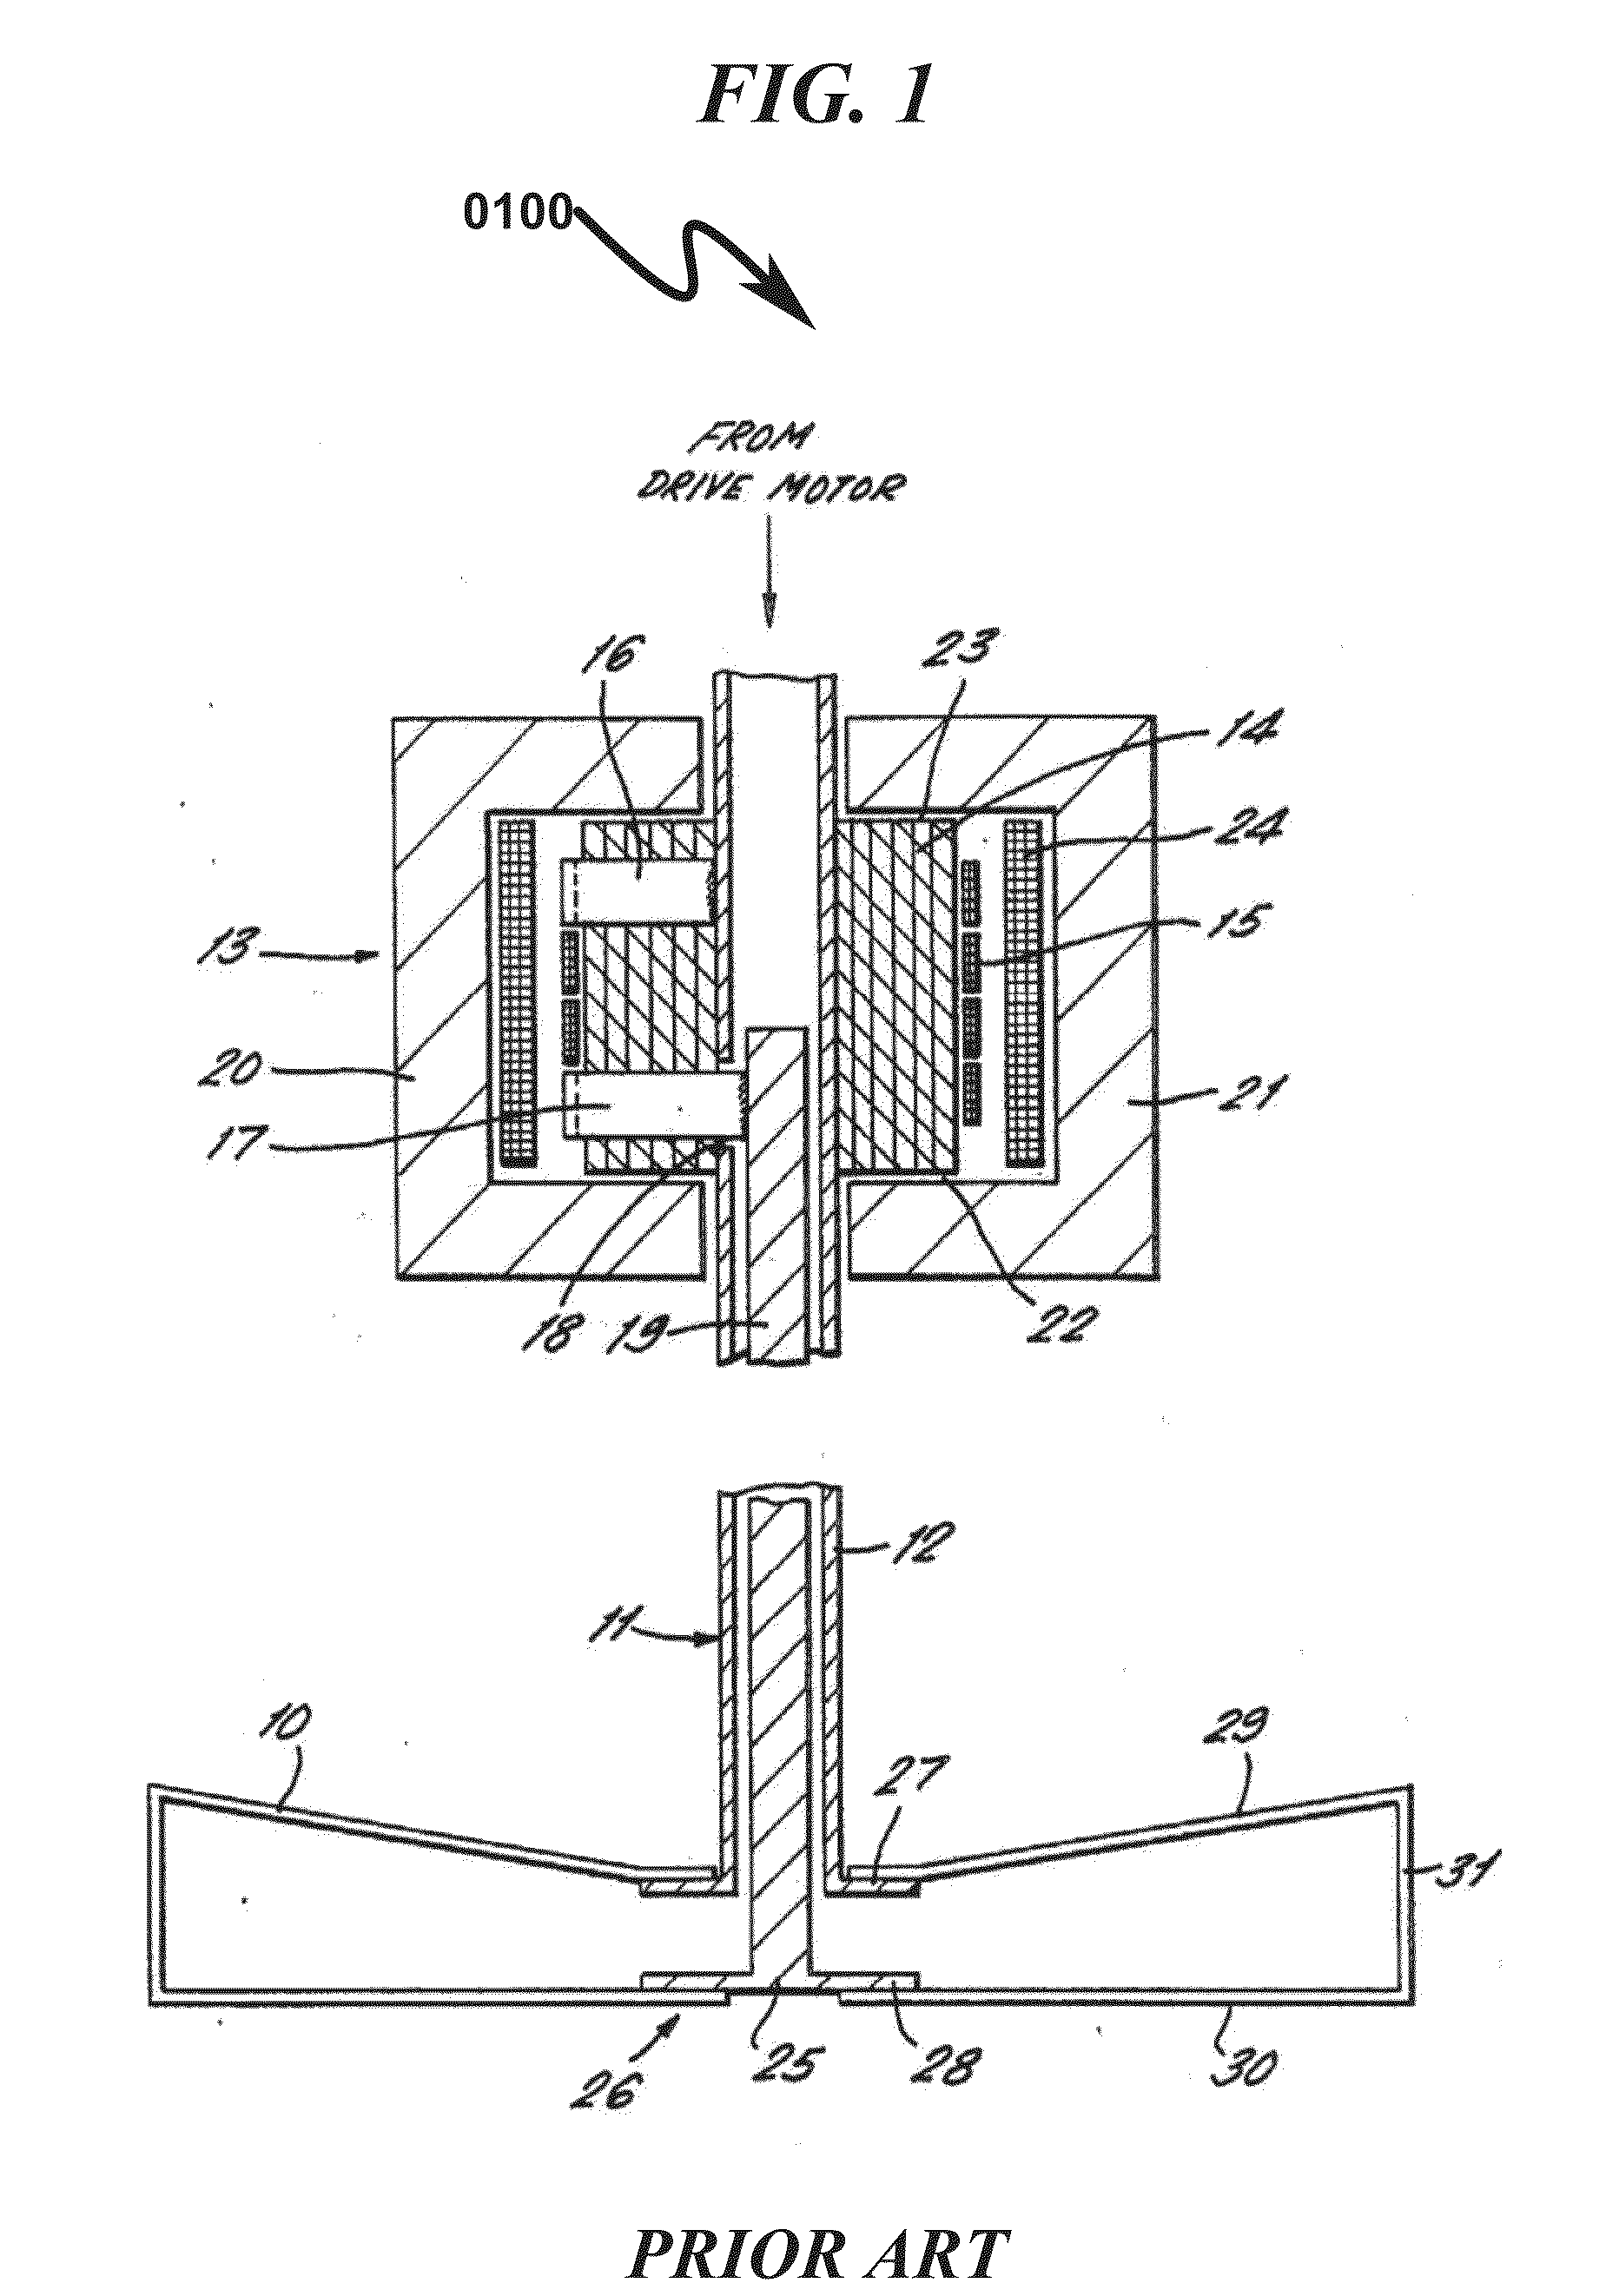 Beverage Mixing System and Method